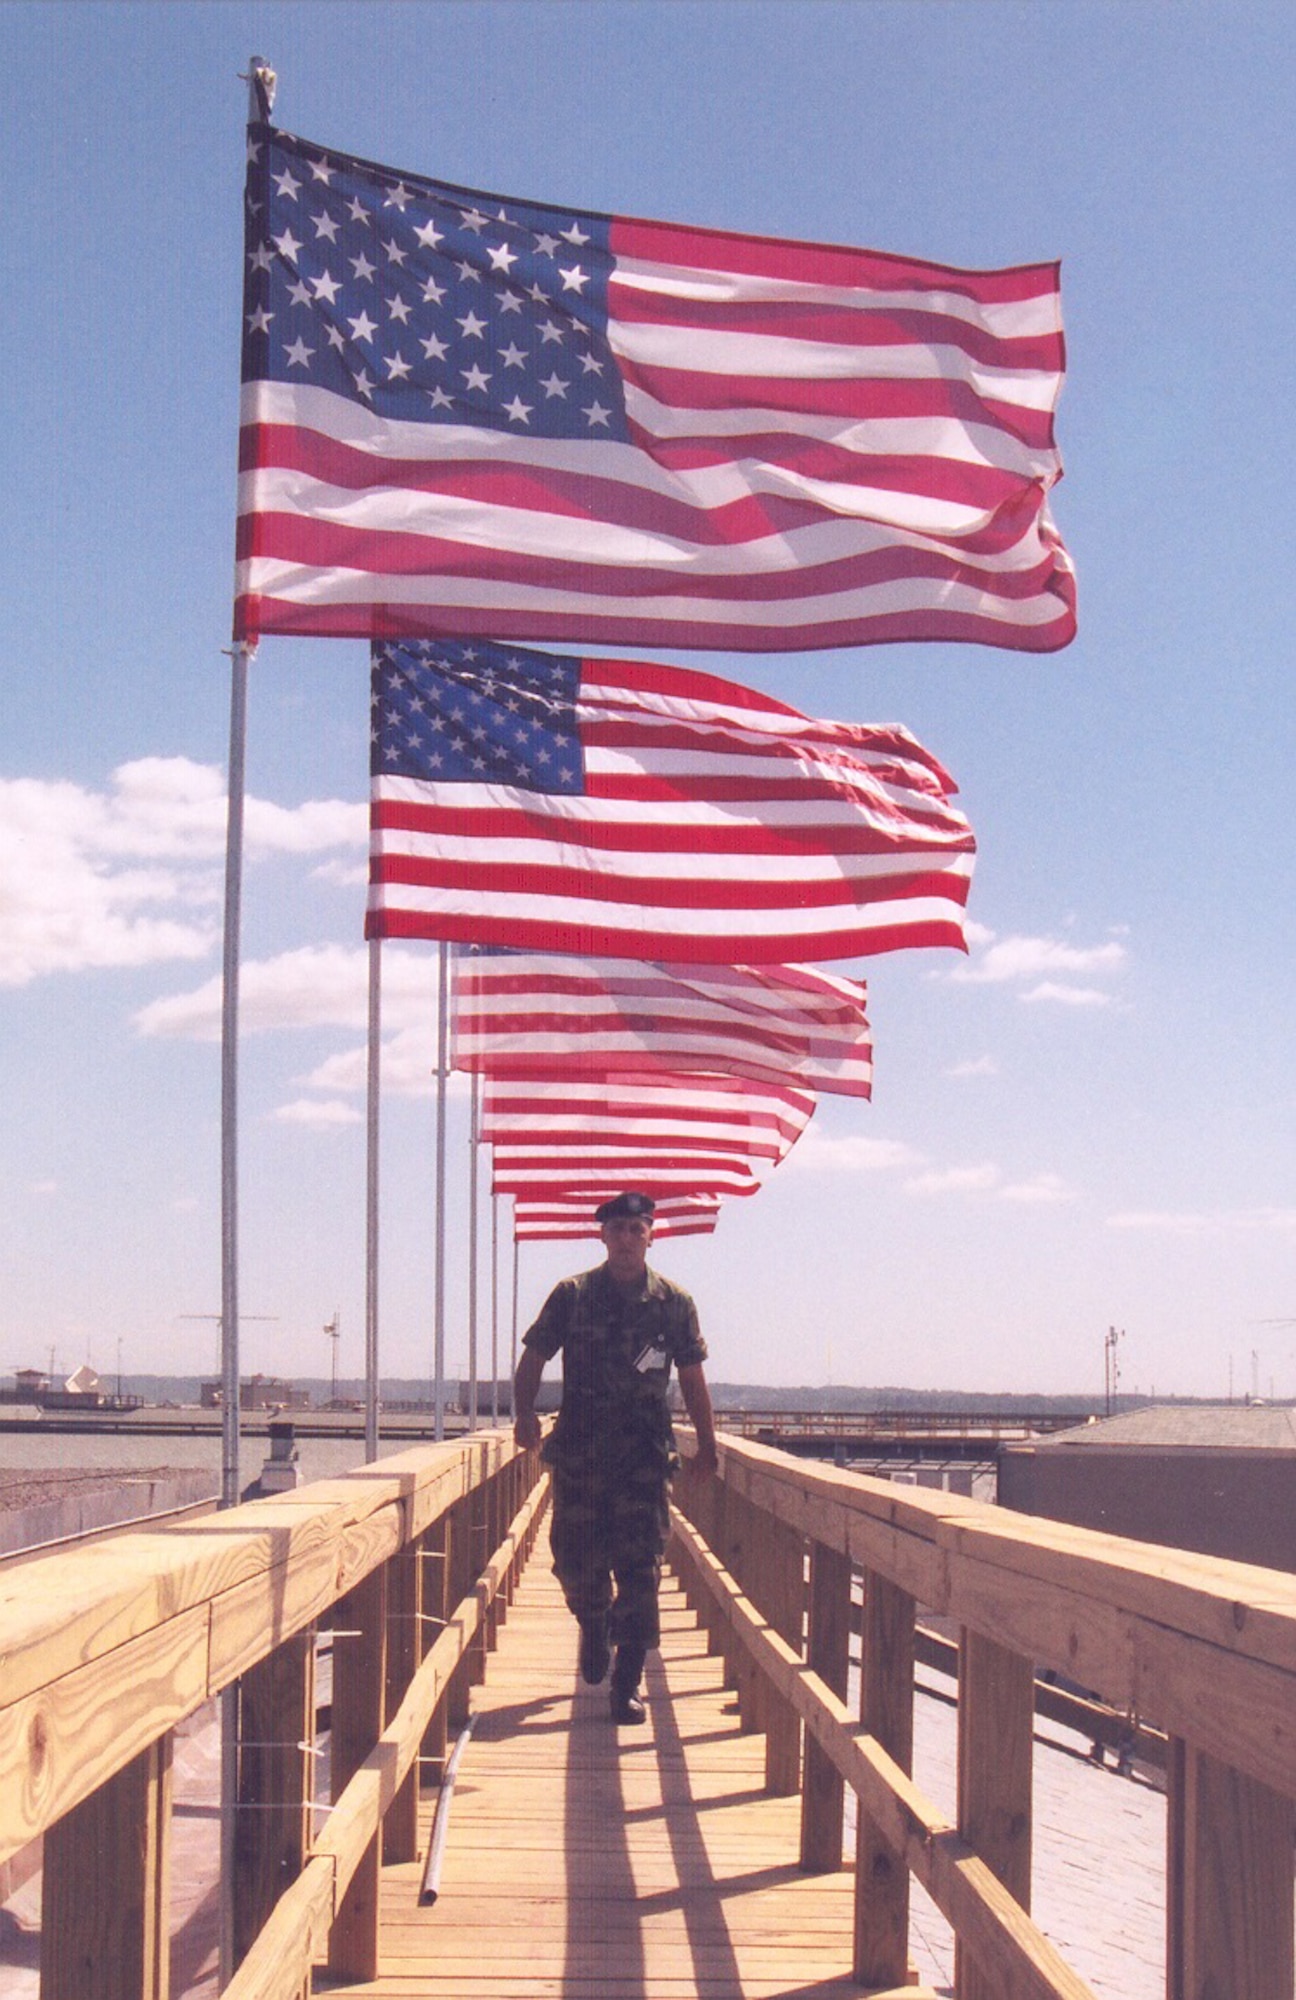 A service member walks under displayed American flags at the Pentagon in Washington, D.C., during a 9/11 observance in 2002. (Courtesy photo)